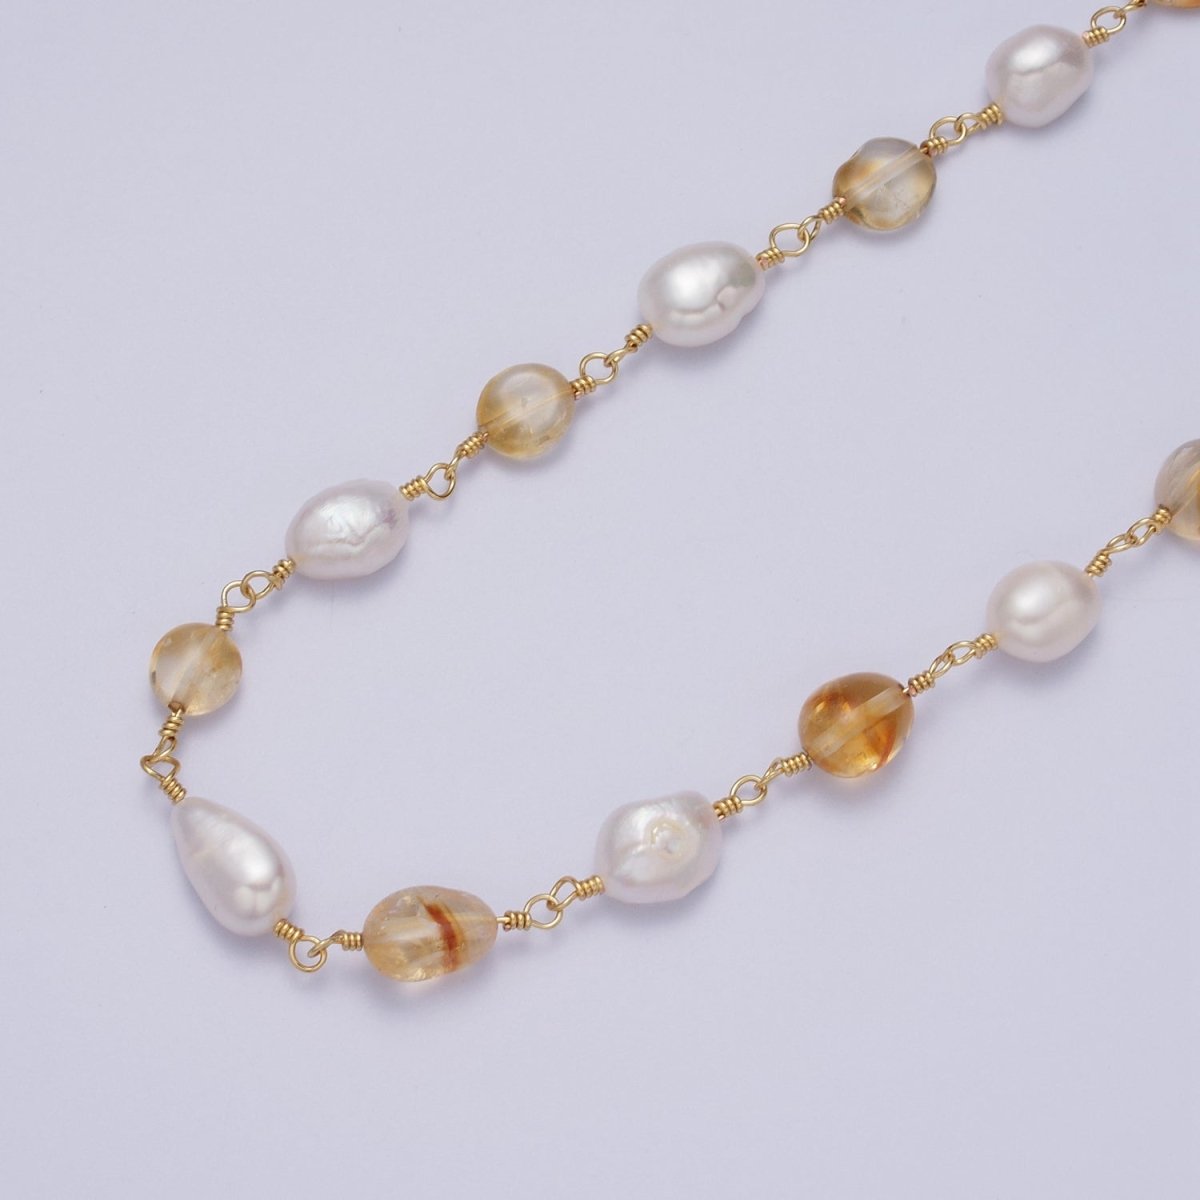 24K Gold Filled Chunky Pearl Gemstone Rose Quartz, Amethyst, Citrine, Moonstone Wire Wrapped Rosary Chain for Jewelry Making Supply | ROLL-1013 1014 1015 1016 1017 Clearance Pricing - DLUXCA